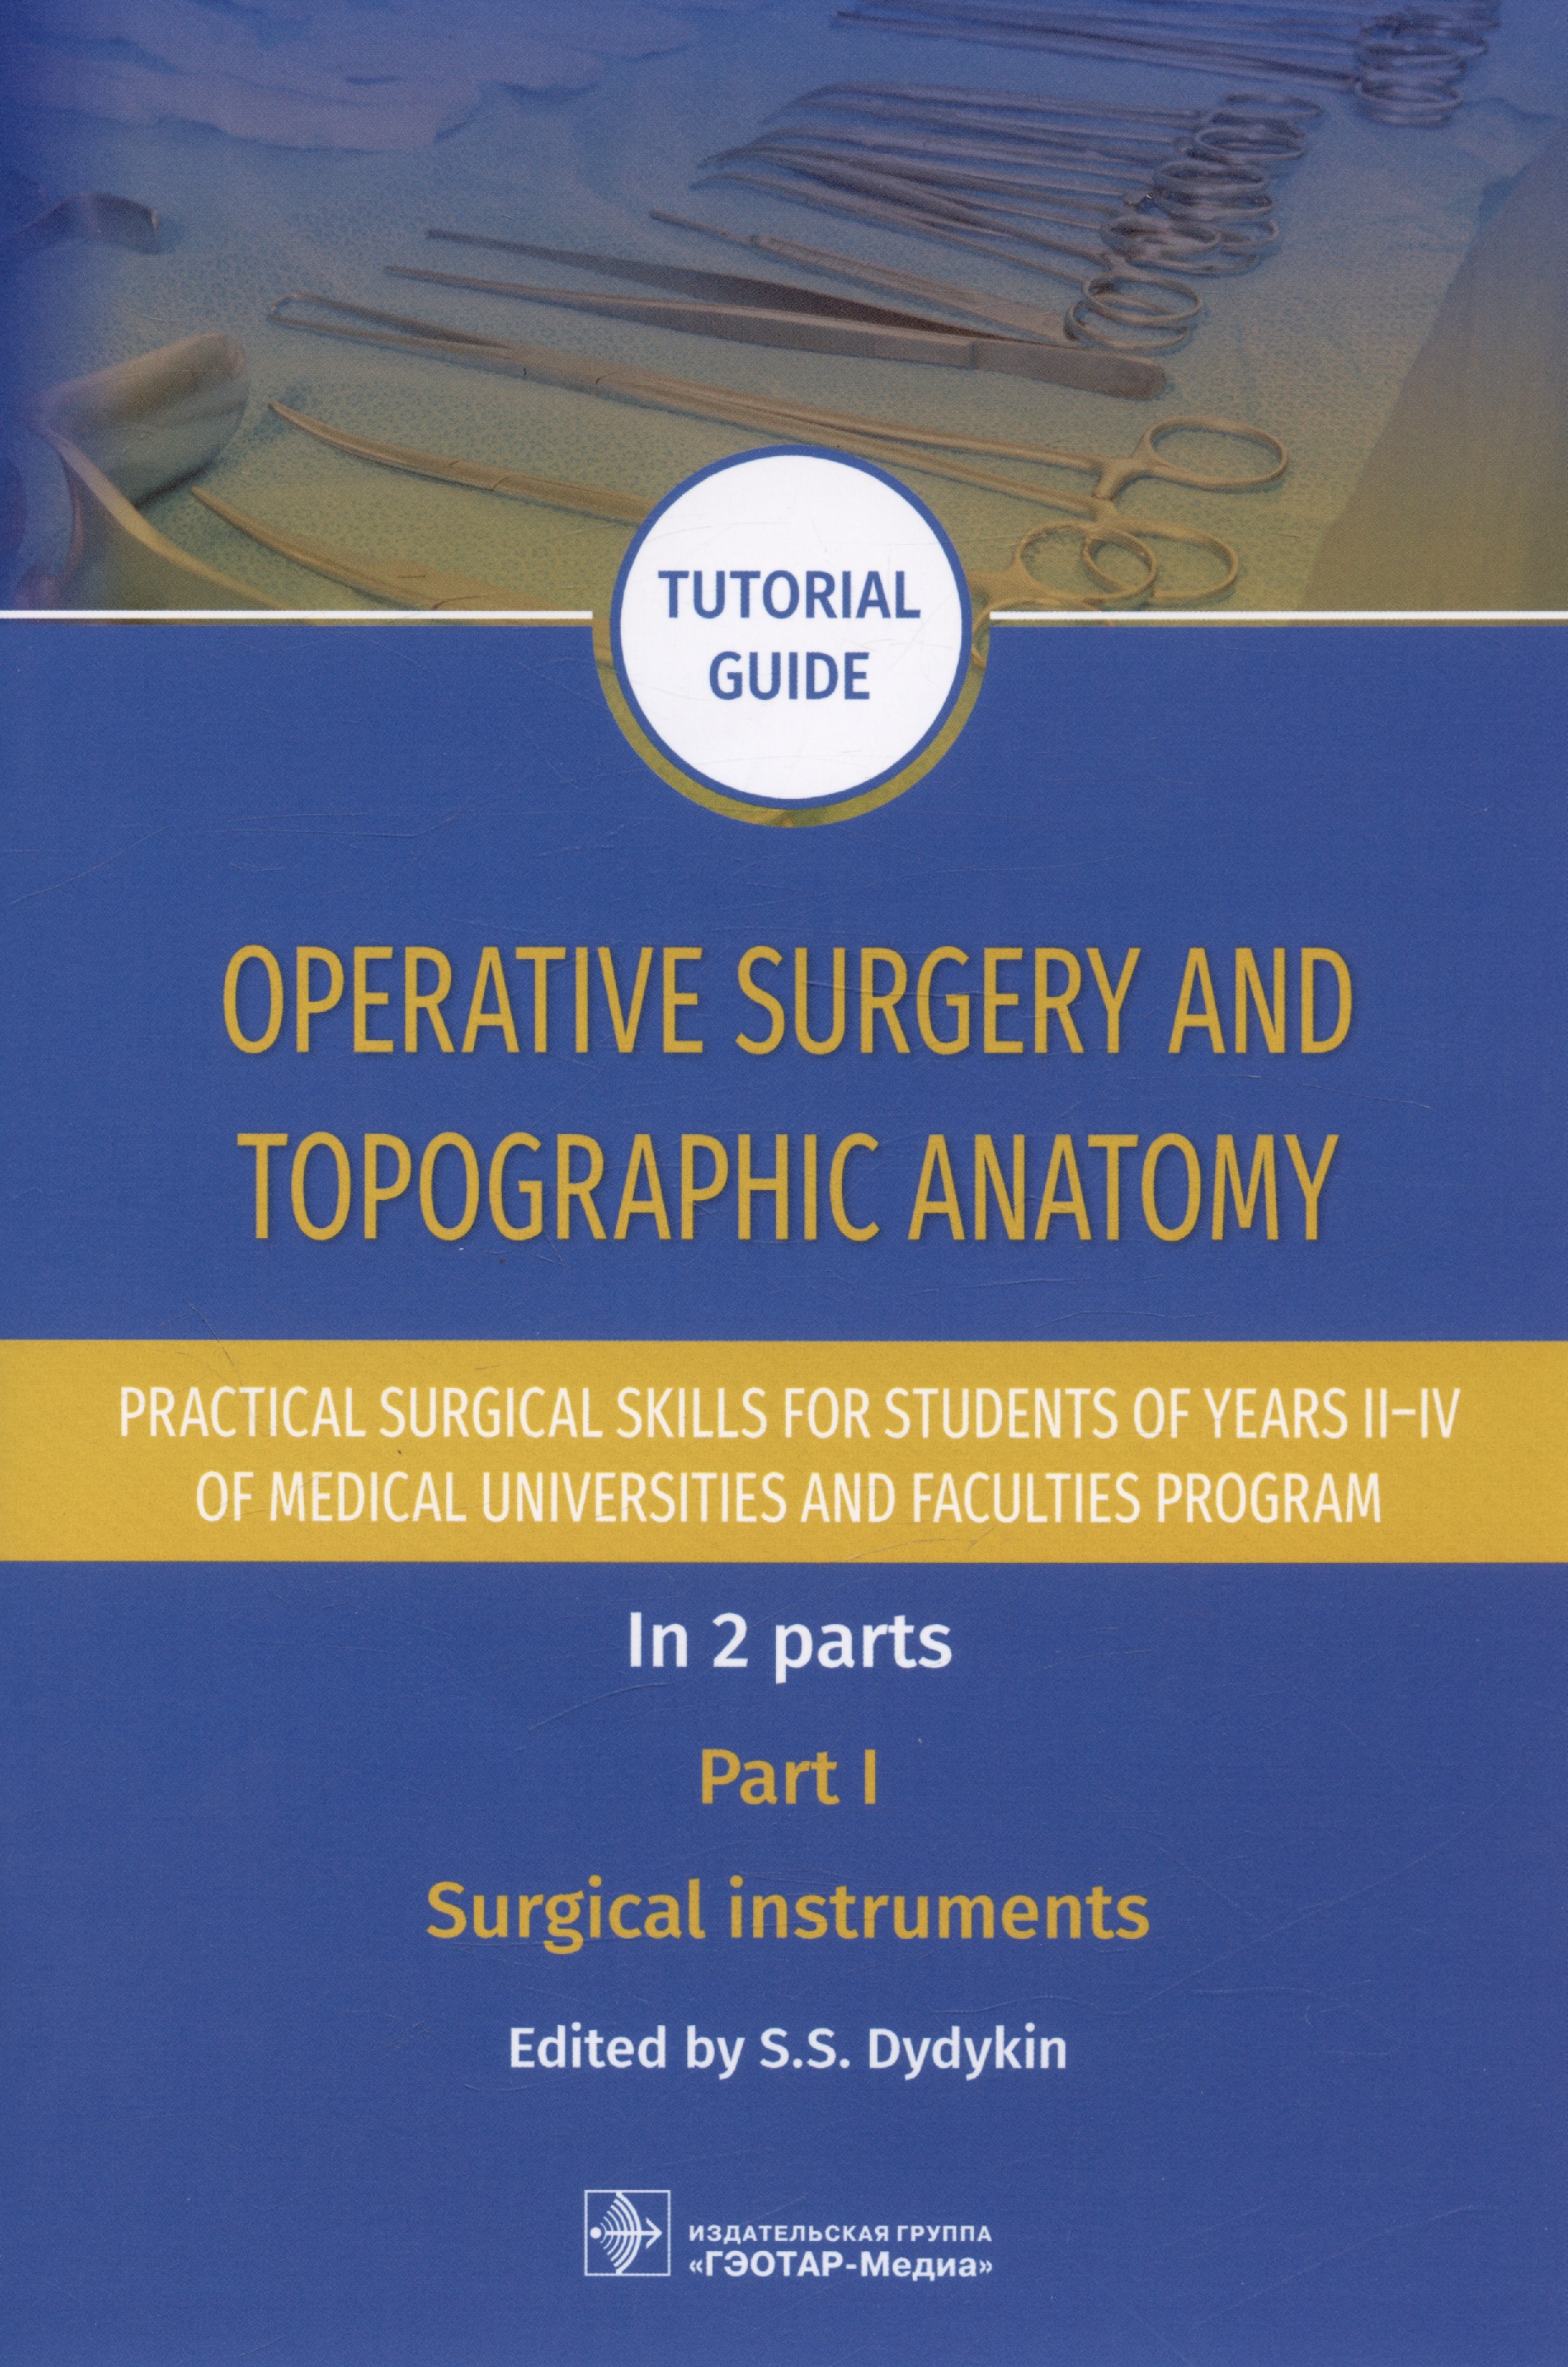 Operative surgery and topographic anatomy. Practical surgical skills for students of years II–IV of medical universities and faculties program: tutorial guide. In 2 parts. Part I. Surgical instruments